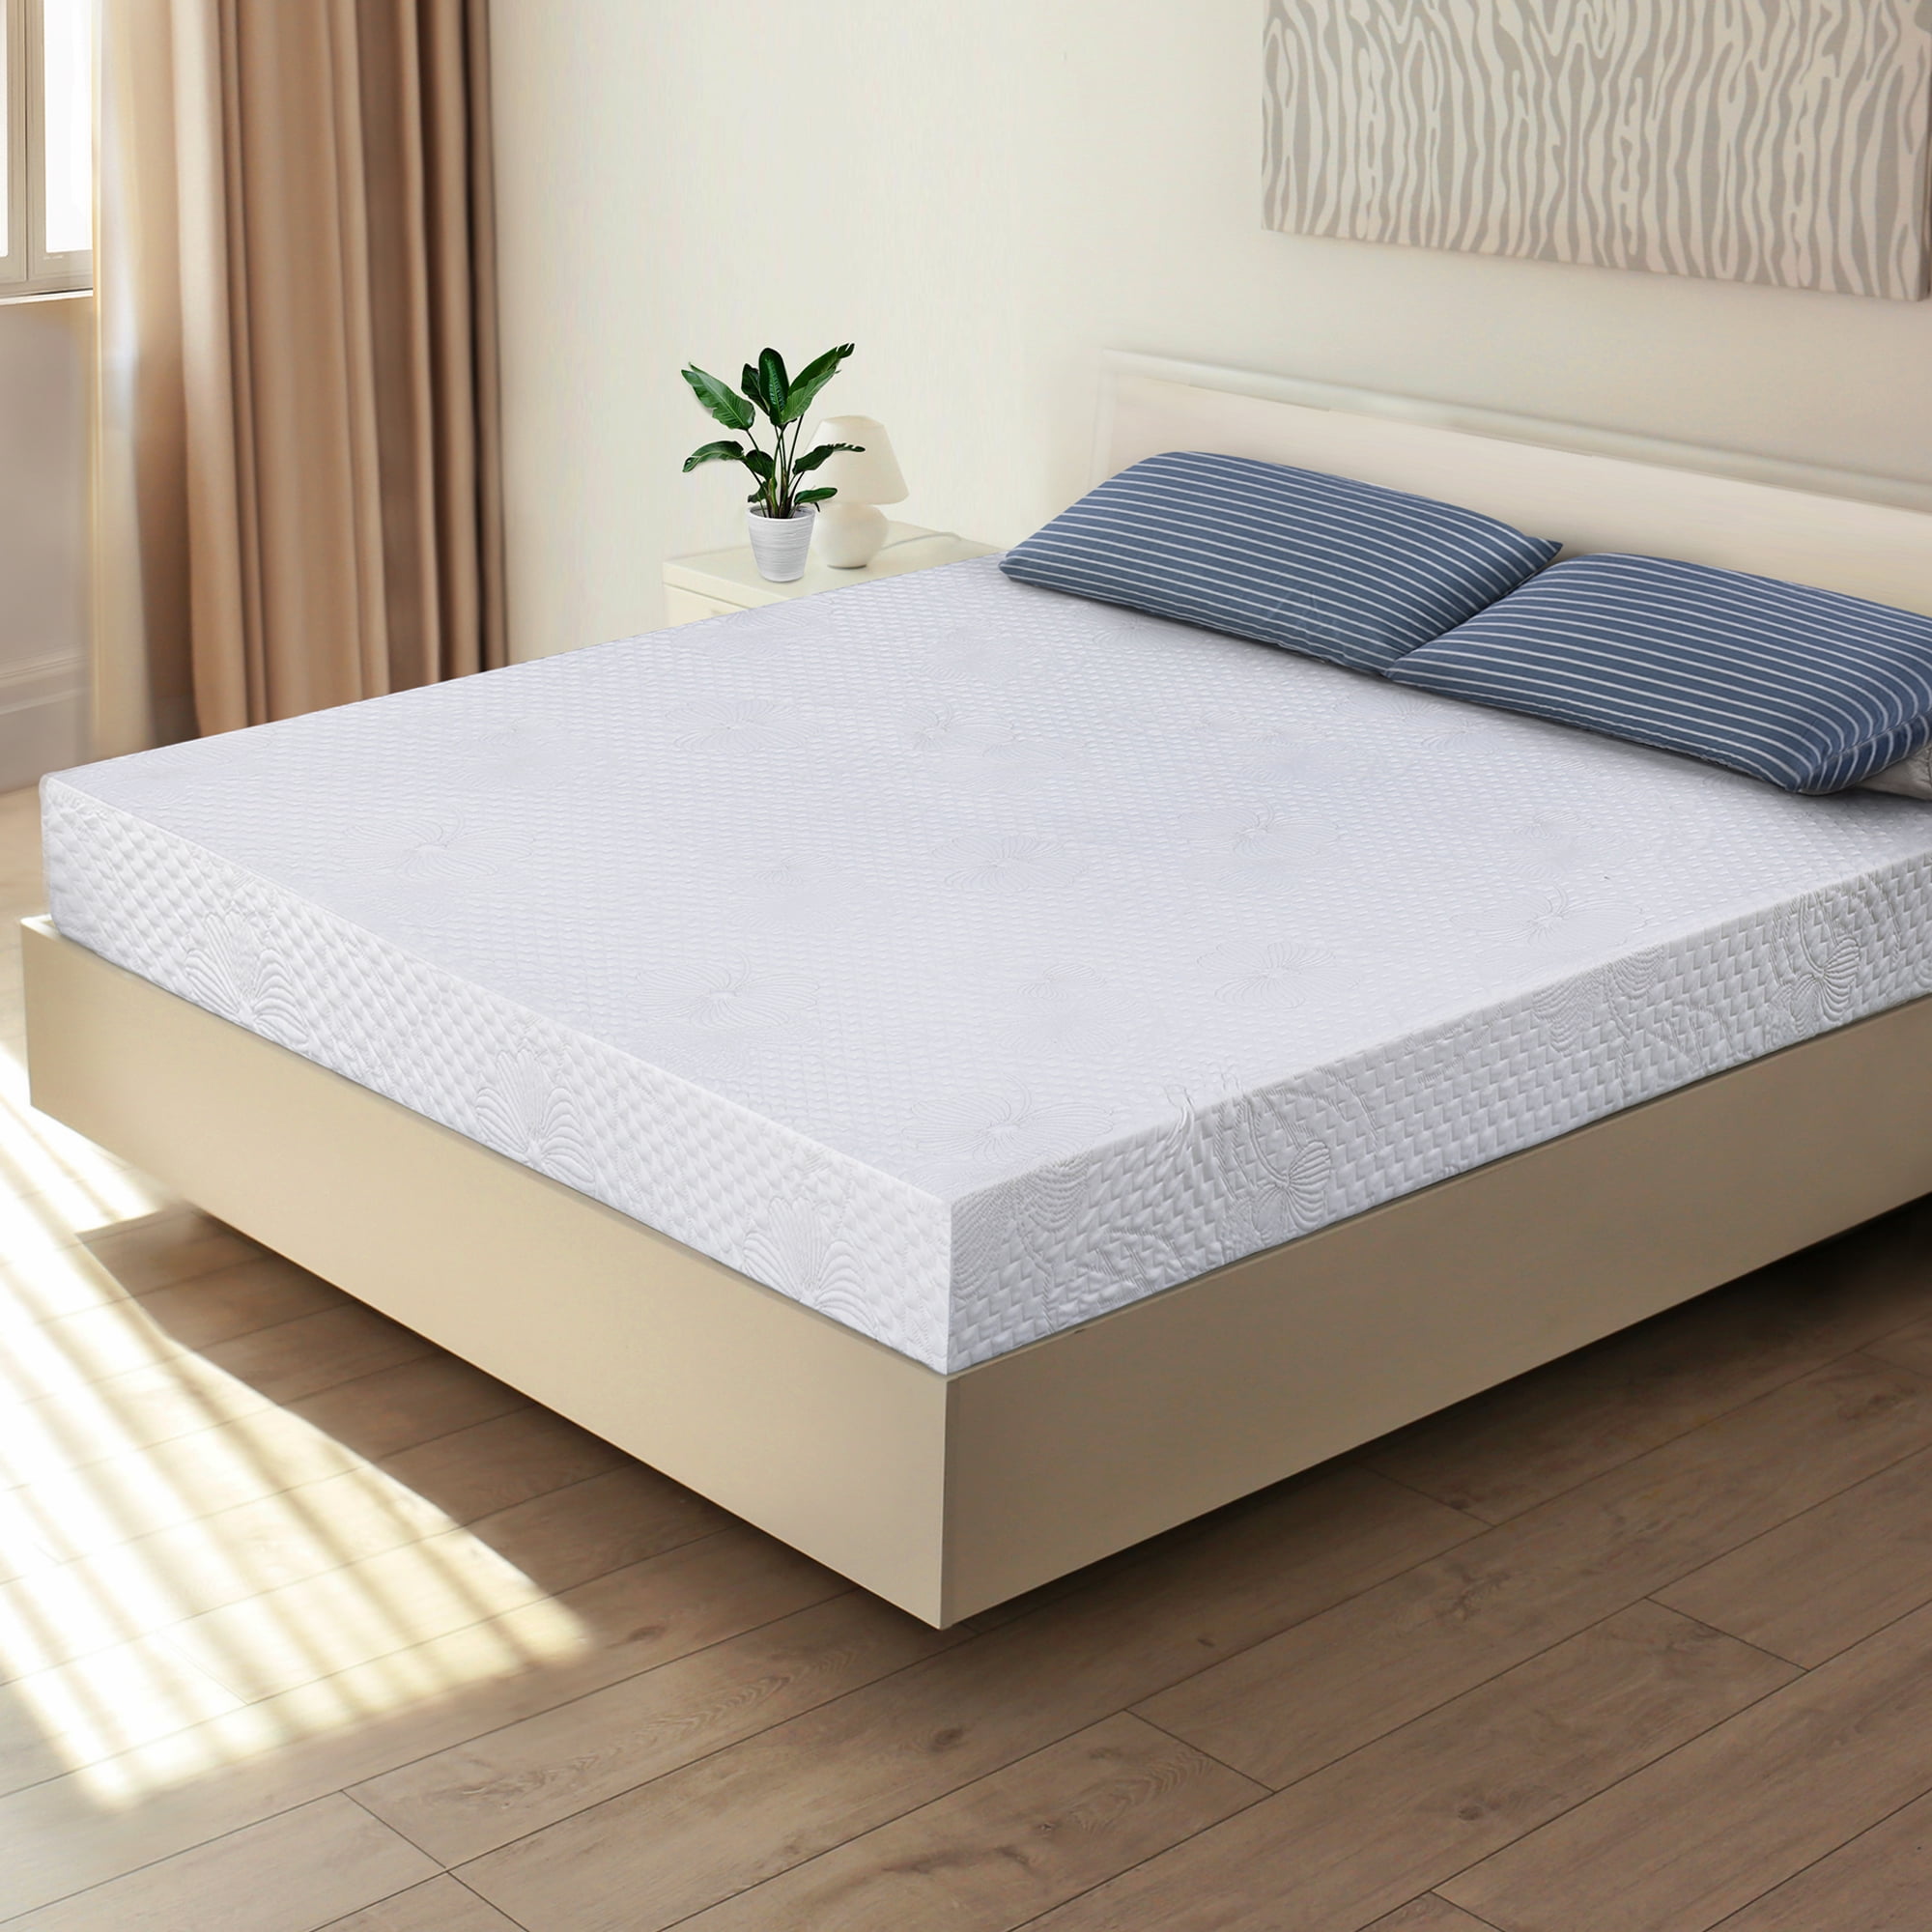 Top Quality Bonnell Coil Twin Mattress Soft Cover Made Of Polyester Design 6Inch 